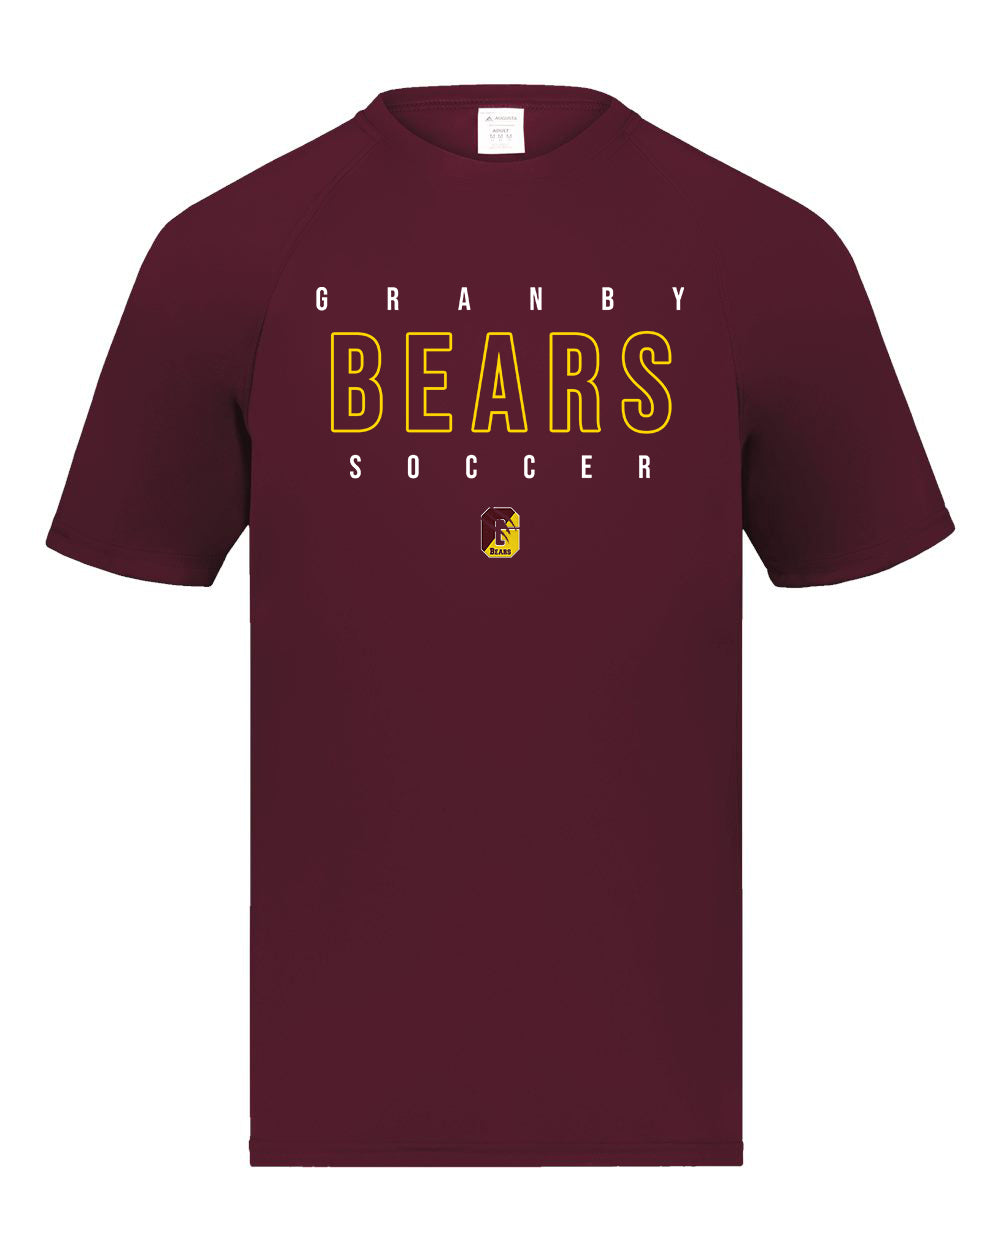 Granby Girls Soccer Tech T-Shirt - 2790 (color options available)